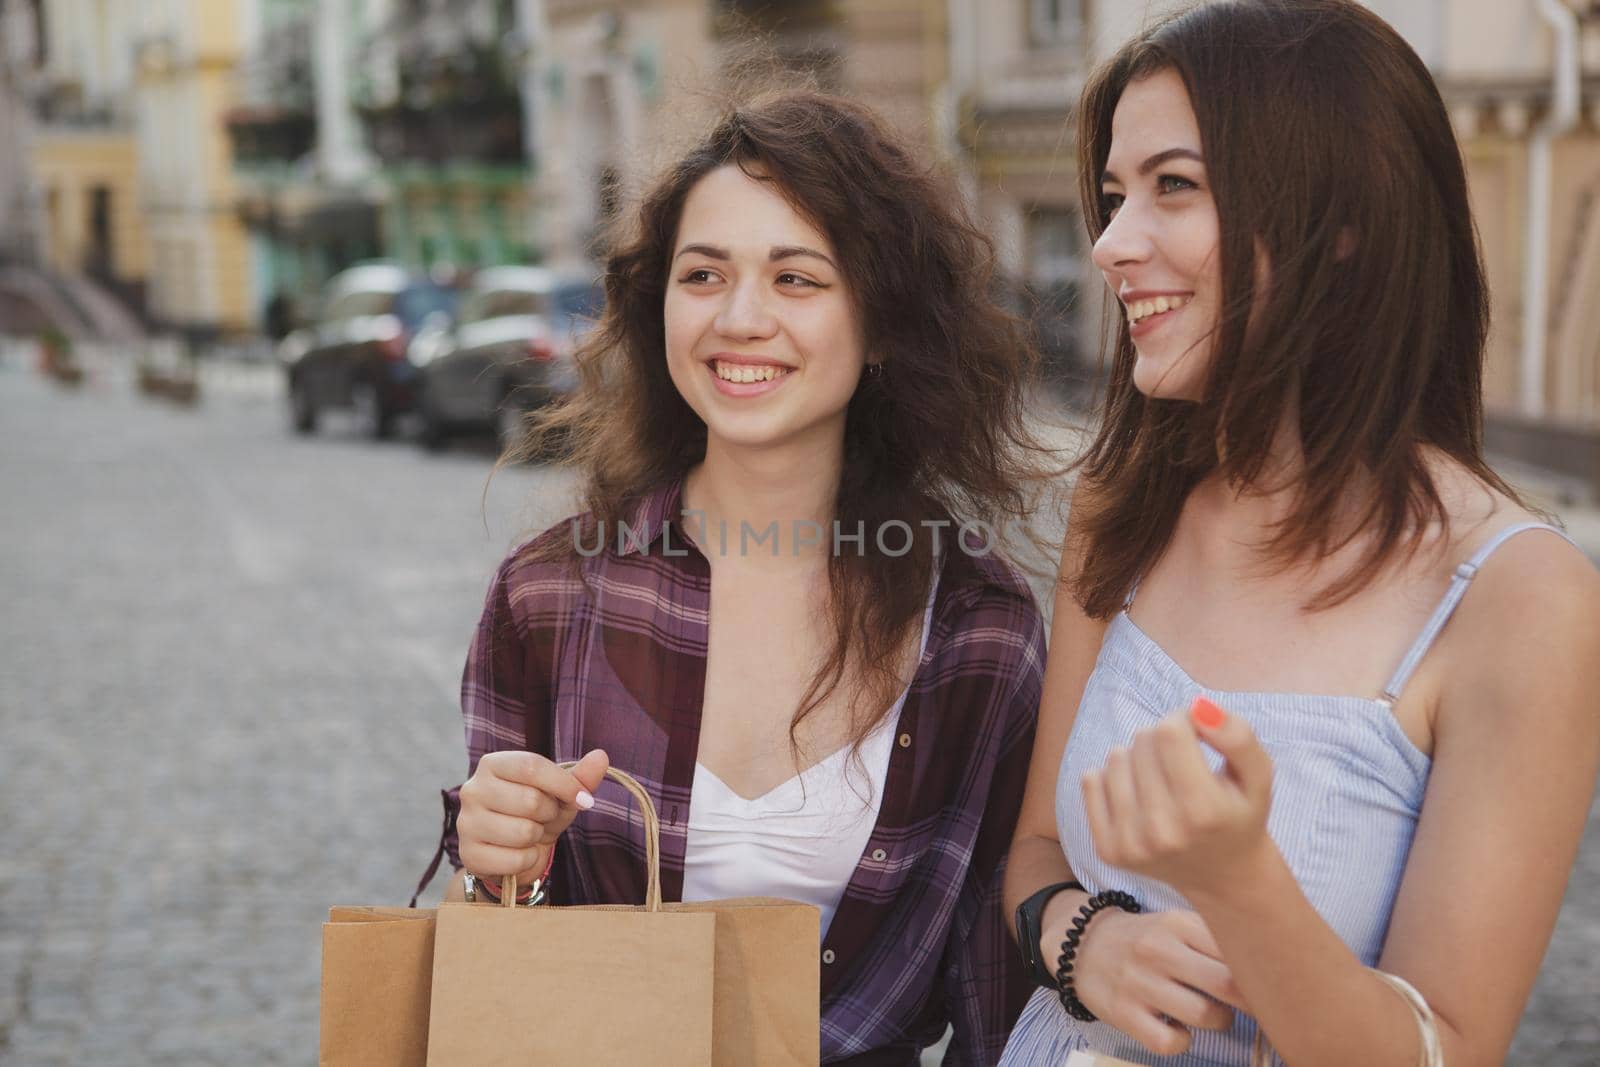 Beautiful young women enjoying walking city streets together after shopping by MAD_Production